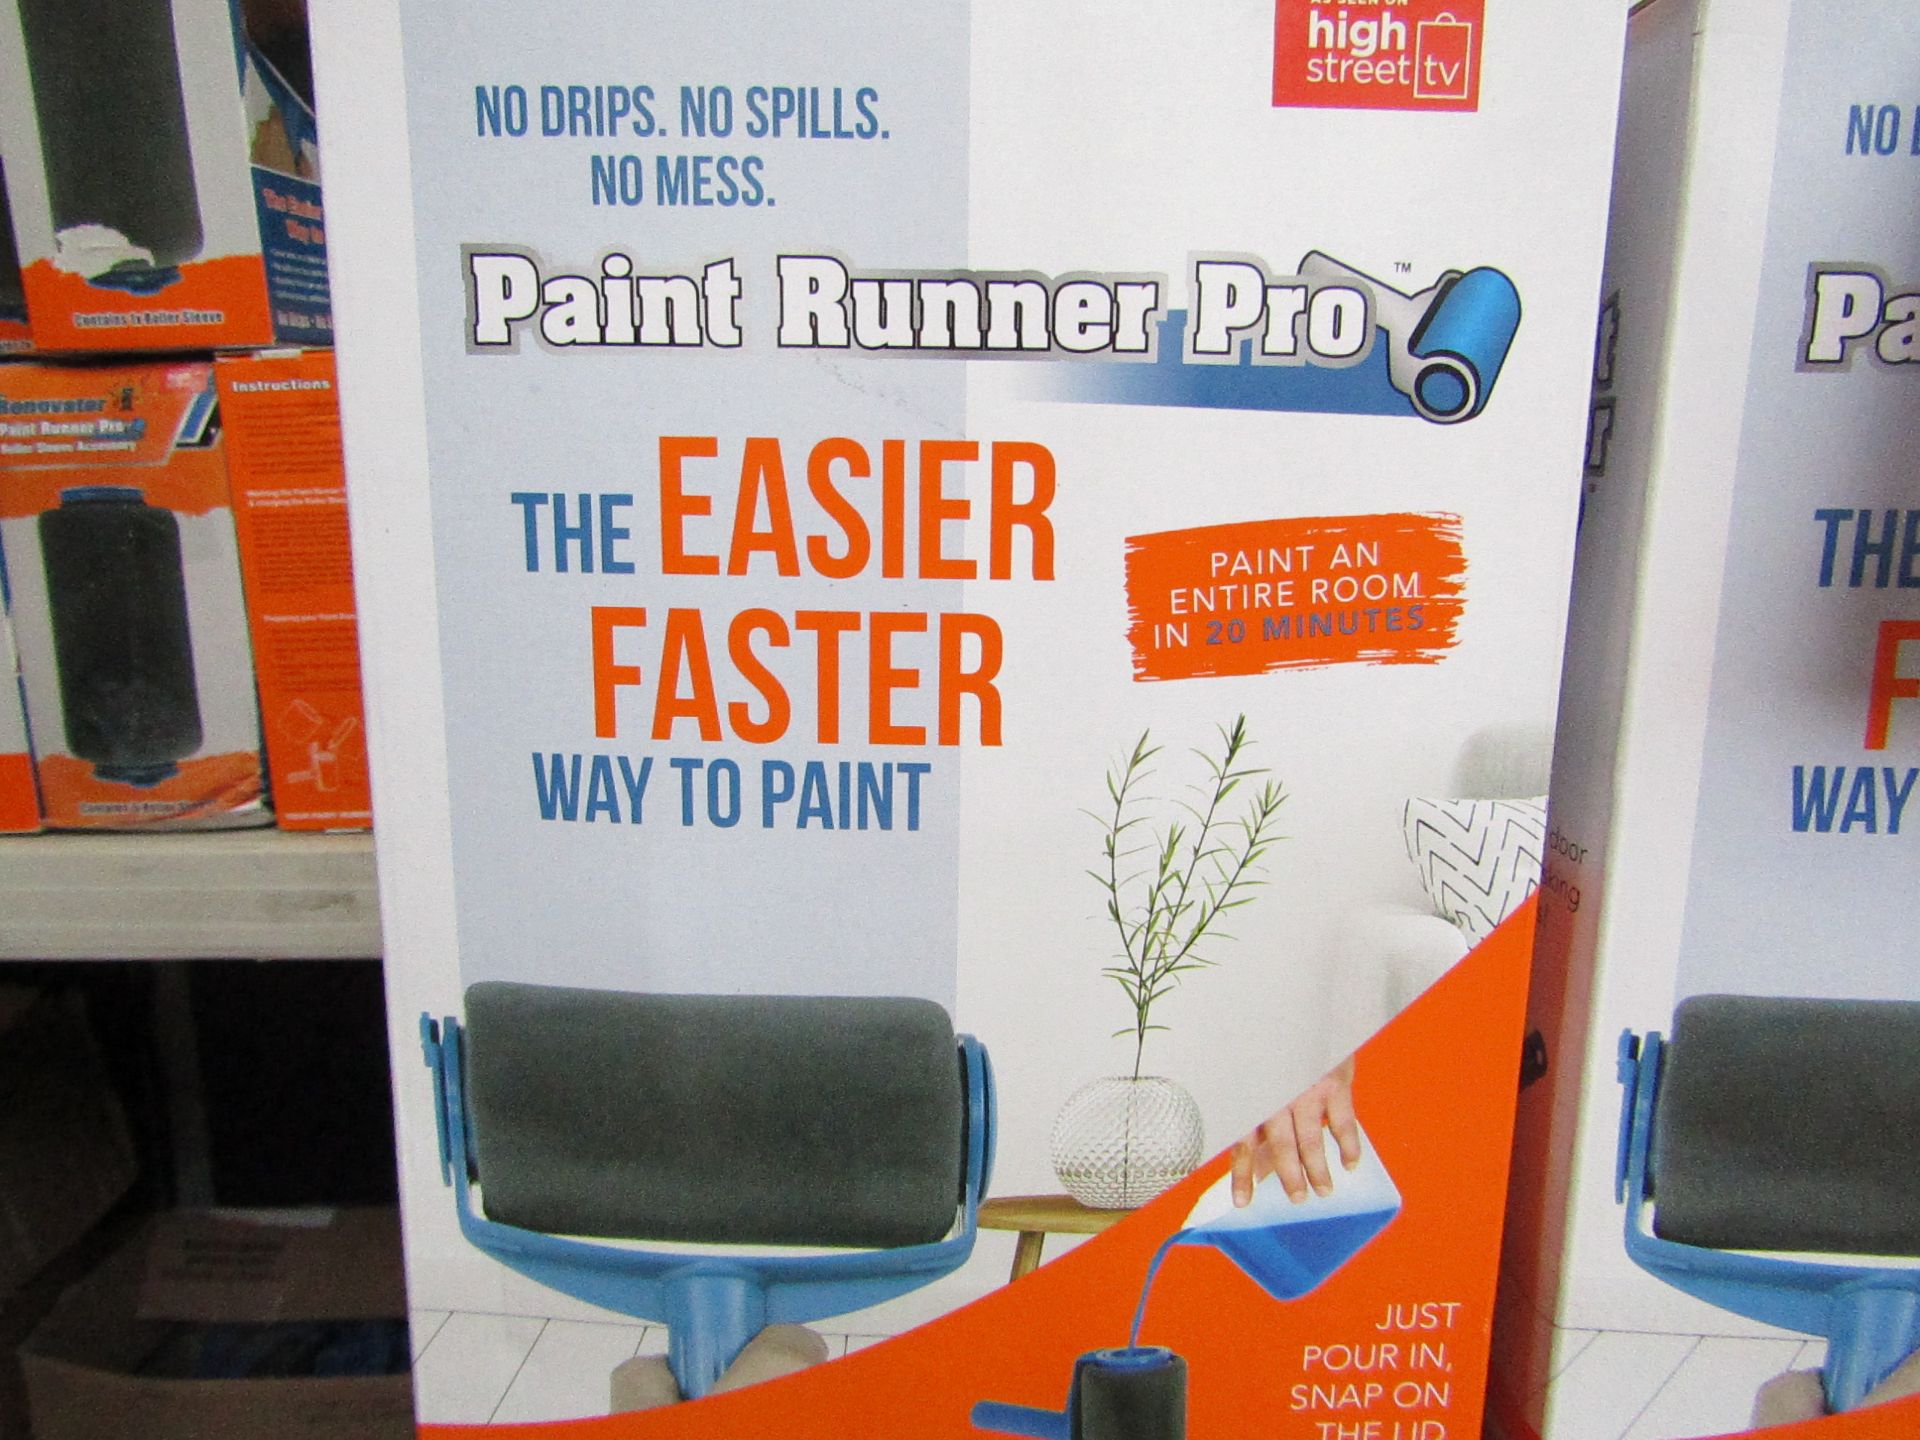 | 1x | paint runner pro | unchecked and boxed | no online re-sale | SKU C5060541510050 | RRP £29.